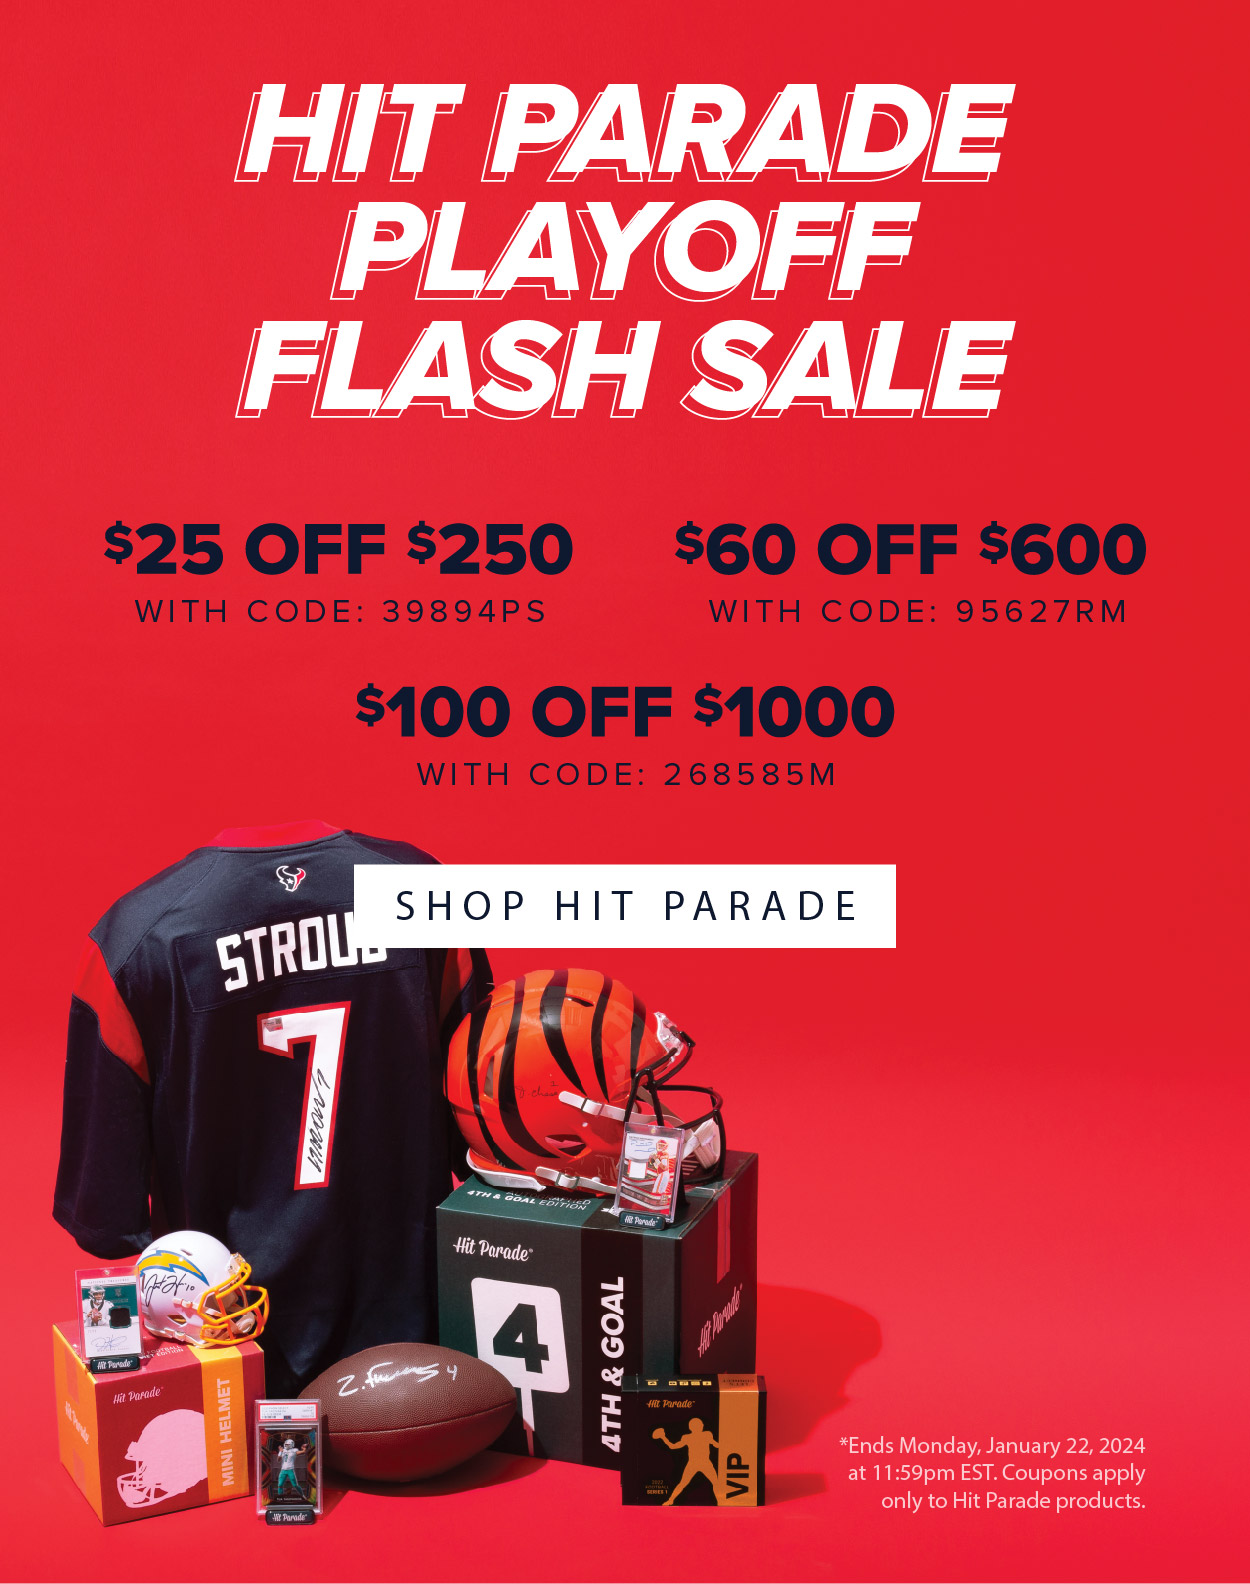 Hit Parade Playoff Flash Sale | $25 Off $25: 39894PS | $60 OFF $600: 95627RM | $100 OFF $1000: 268585M